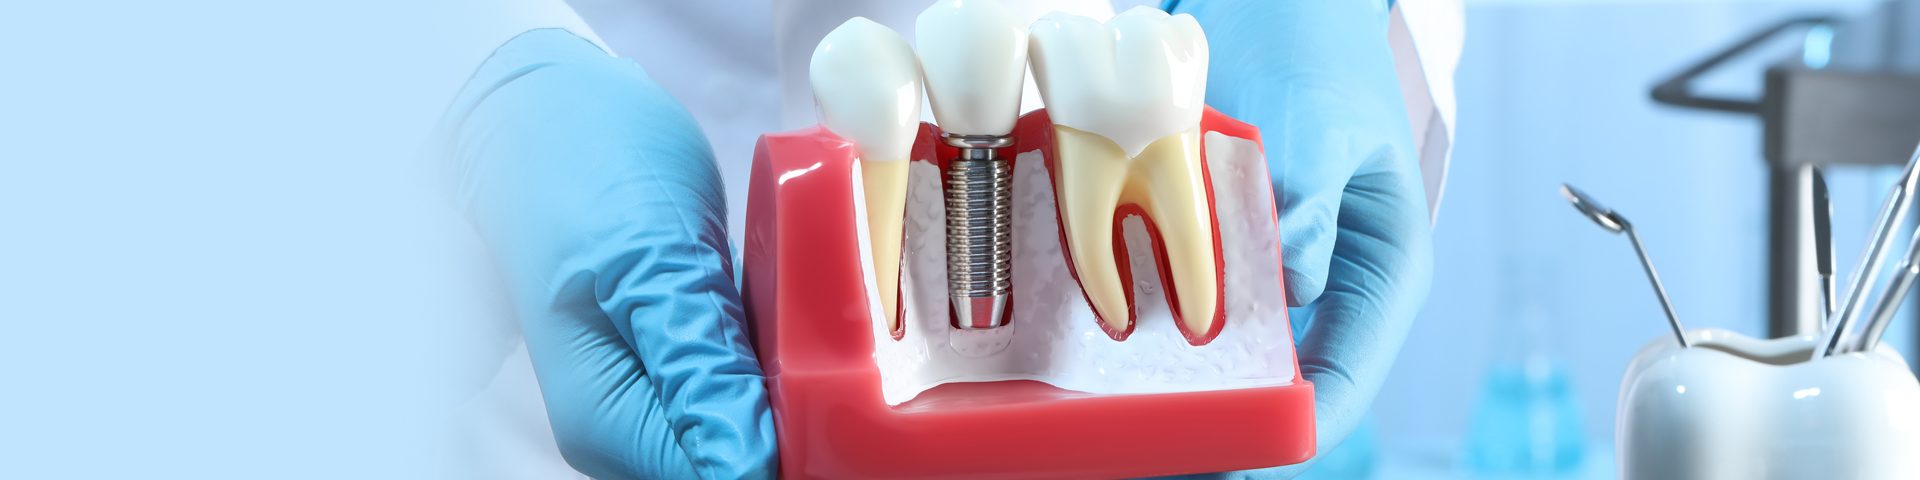 Dental Implants: An Effective Tooth Replacement Option